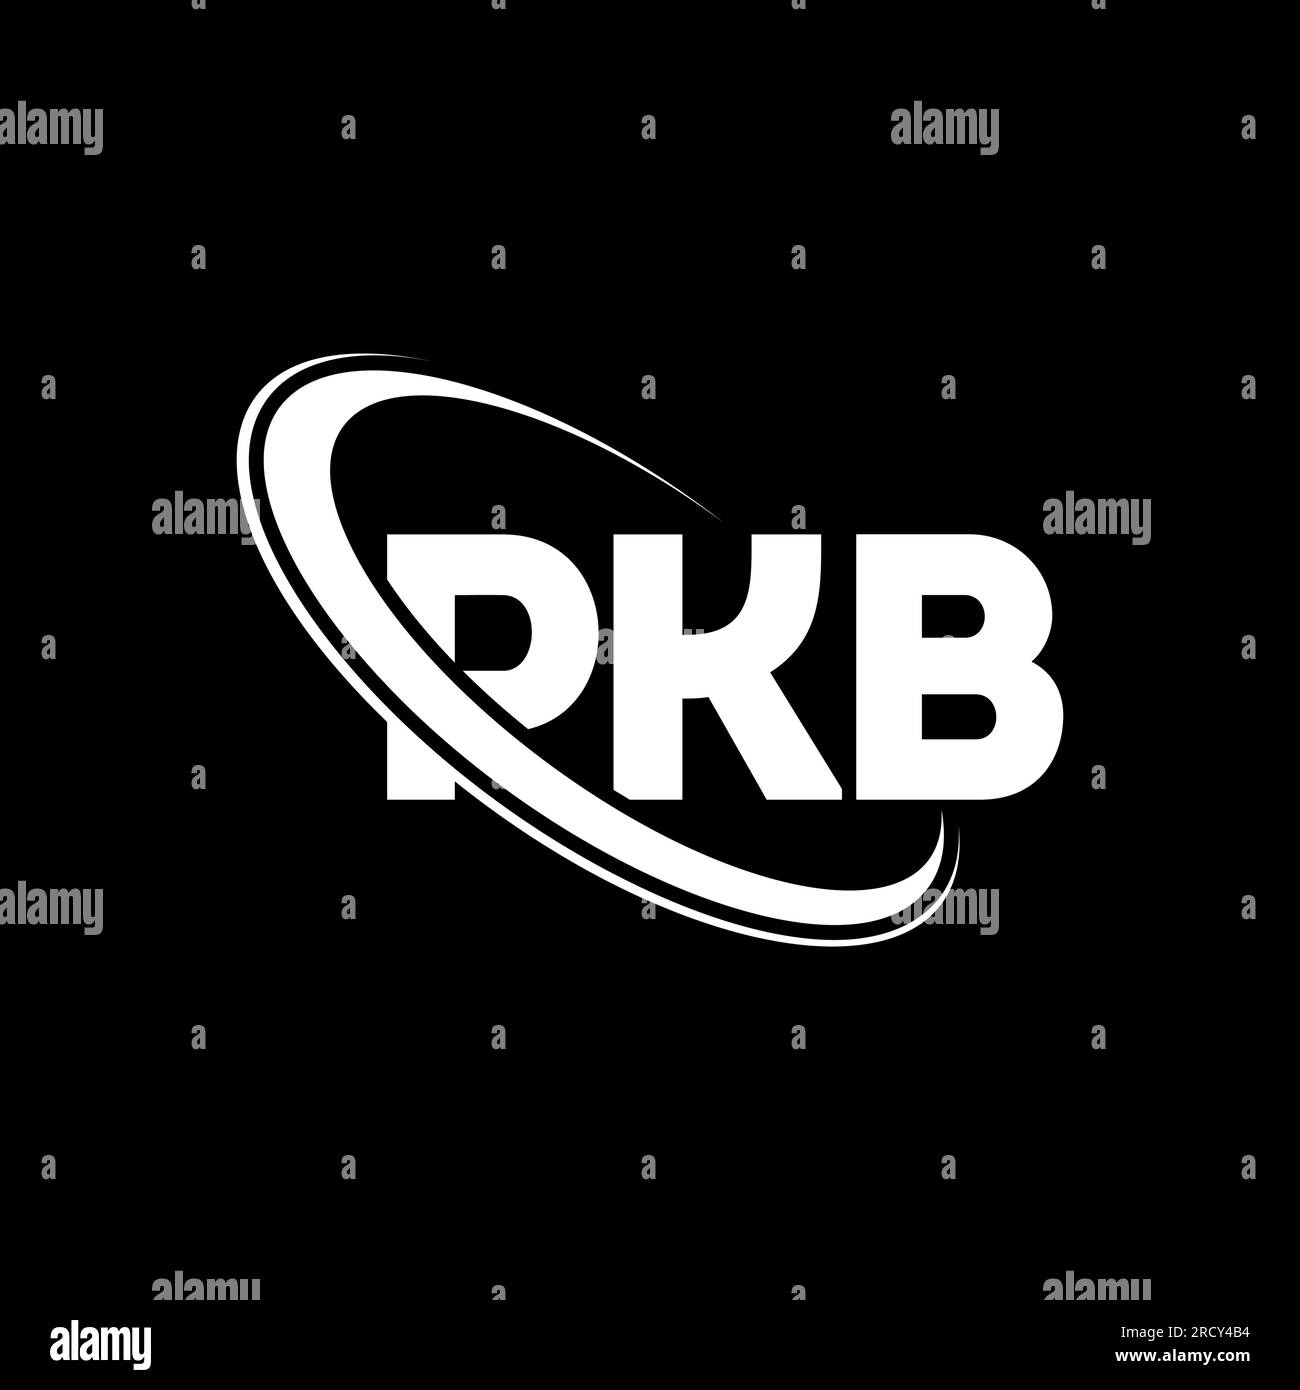 PKB logo. PKB letter. PKB letter logo design. Initials PKB logo linked with circle and uppercase monogram logo. PKB typography for technology, busines Stock Vector